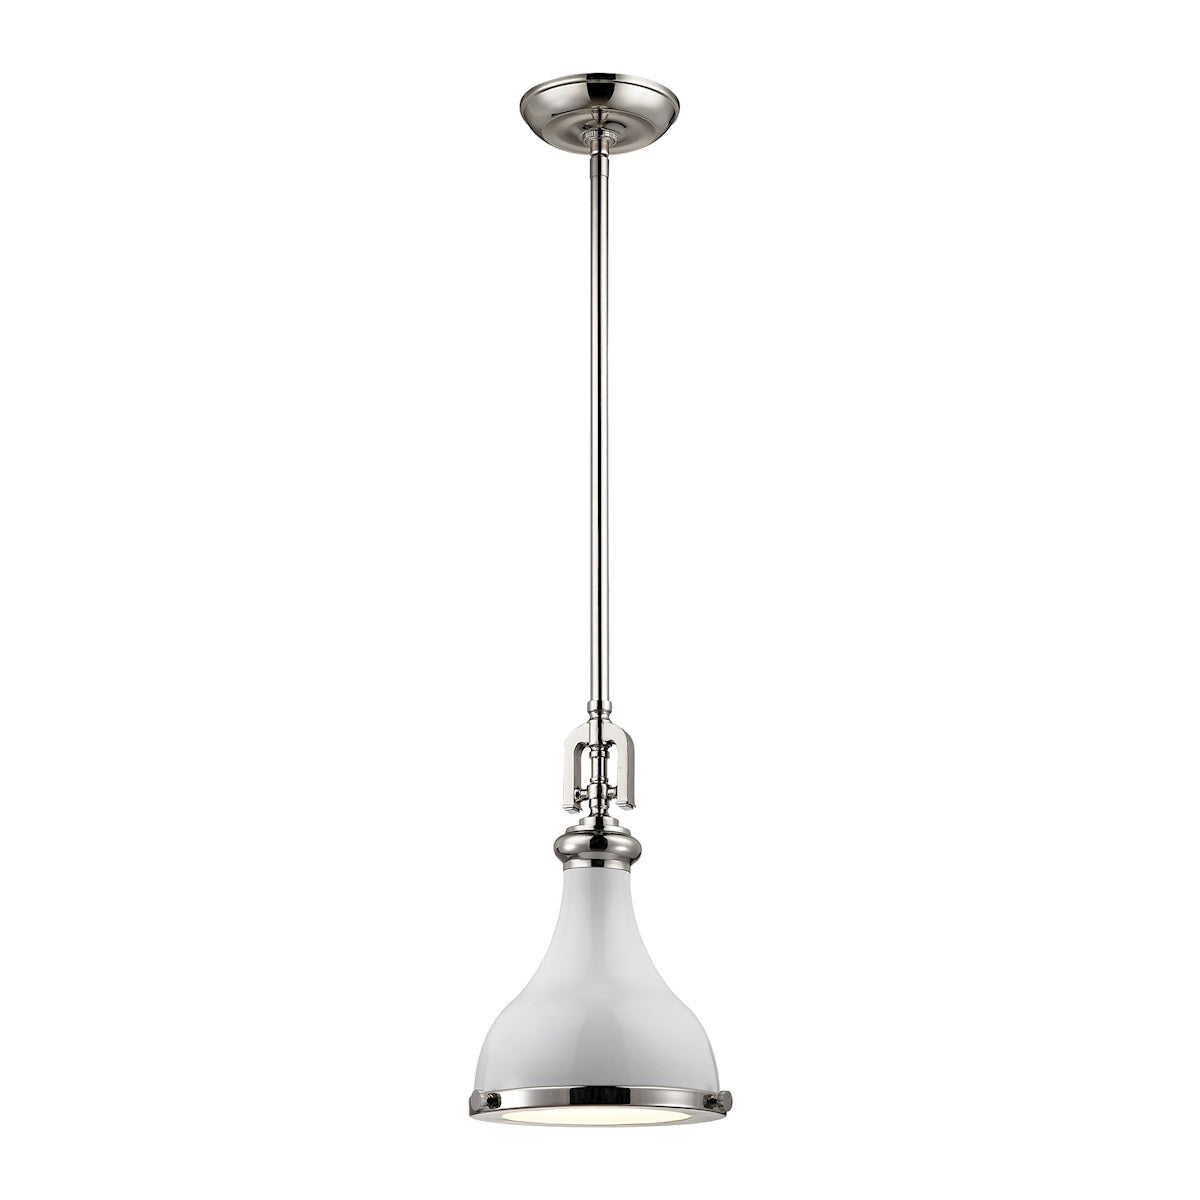 ELK Lighting 57040/1 Rutherford 1-Light Mini Pendant in Polished Nickel with Gloss White Shade